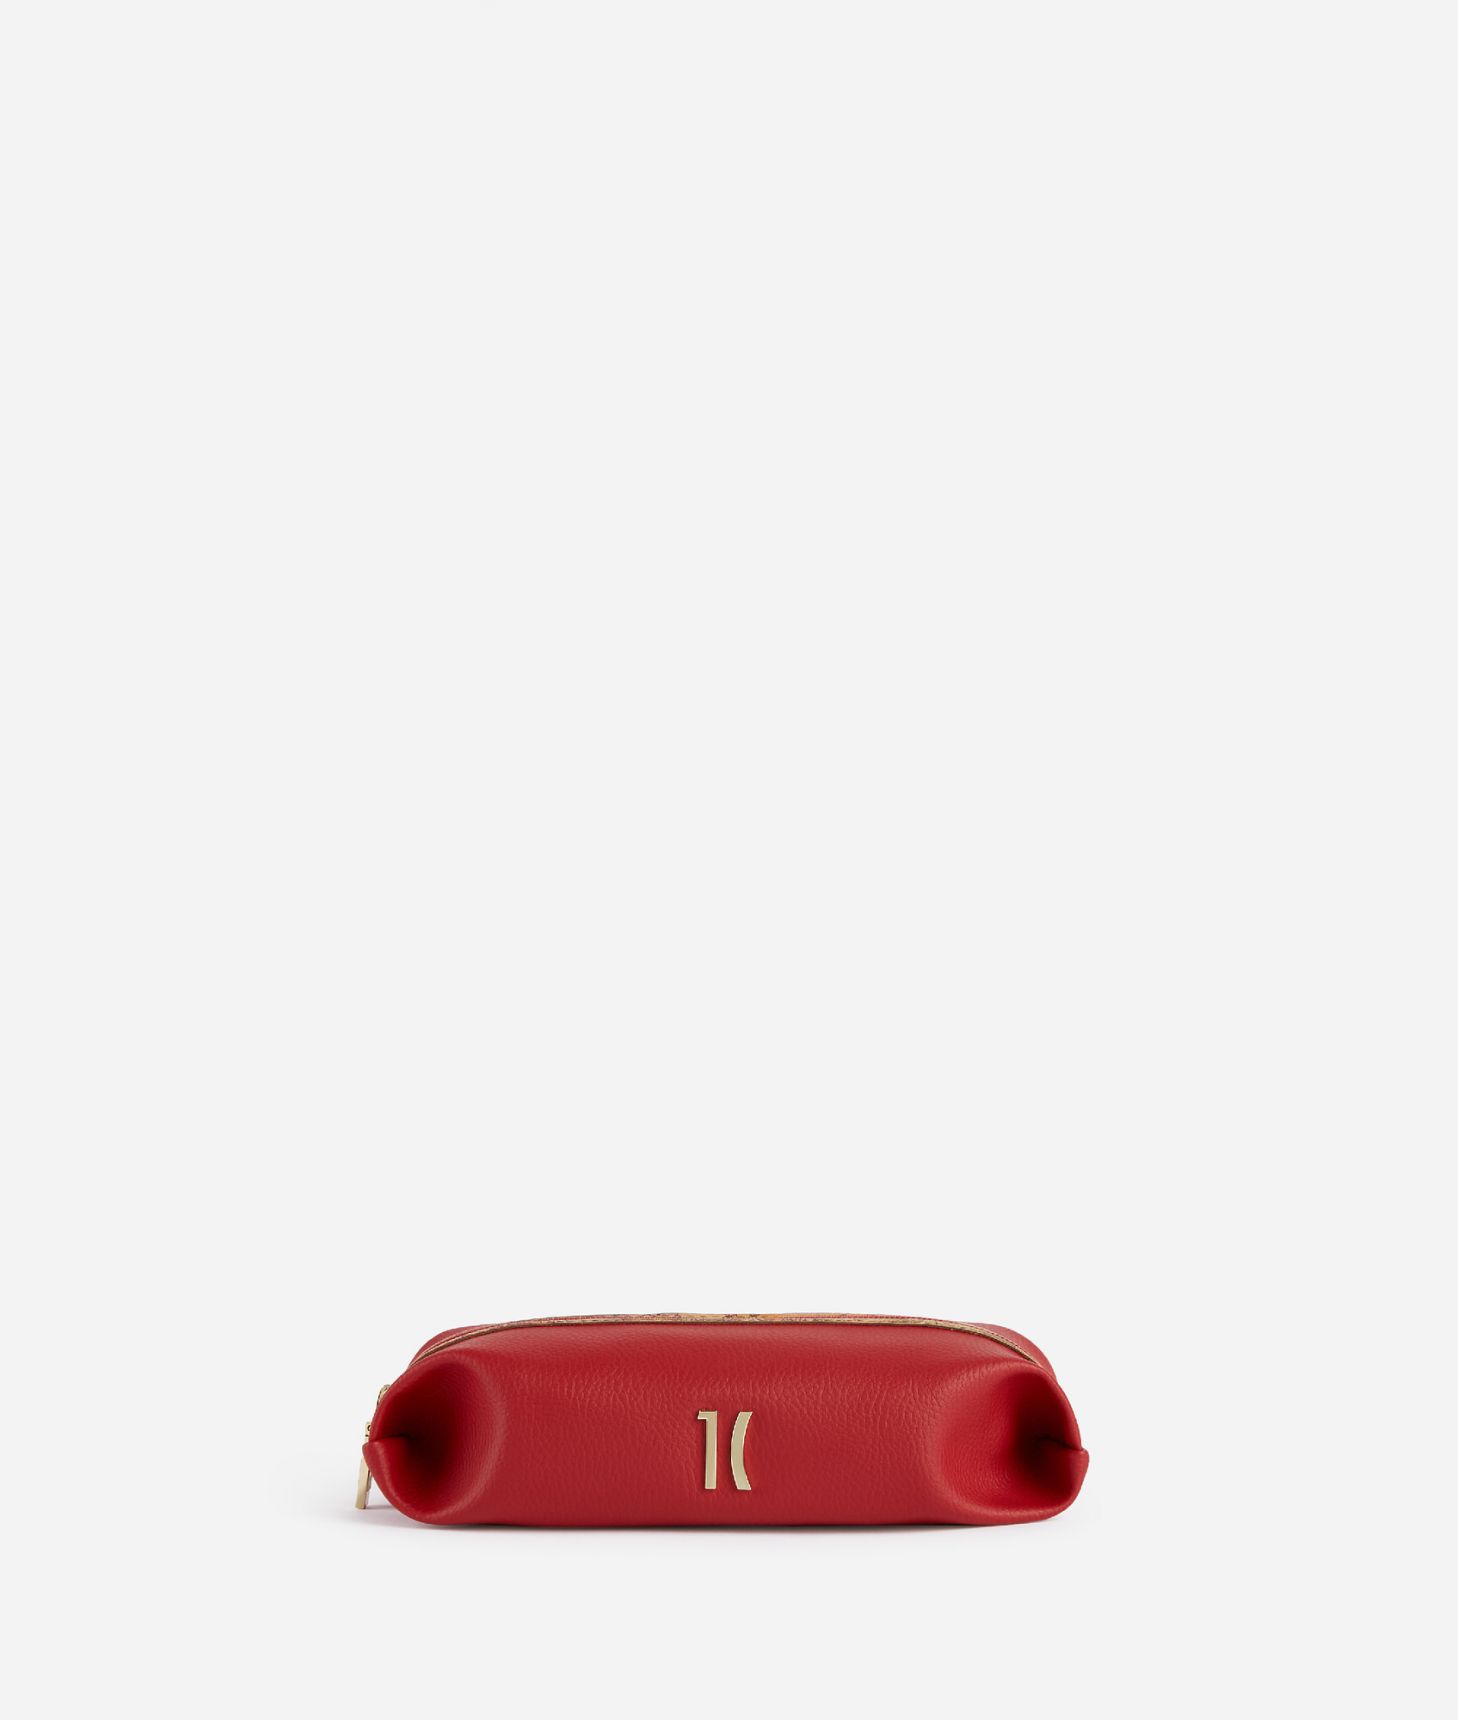 Small clutch bag with logo 1C Red,front